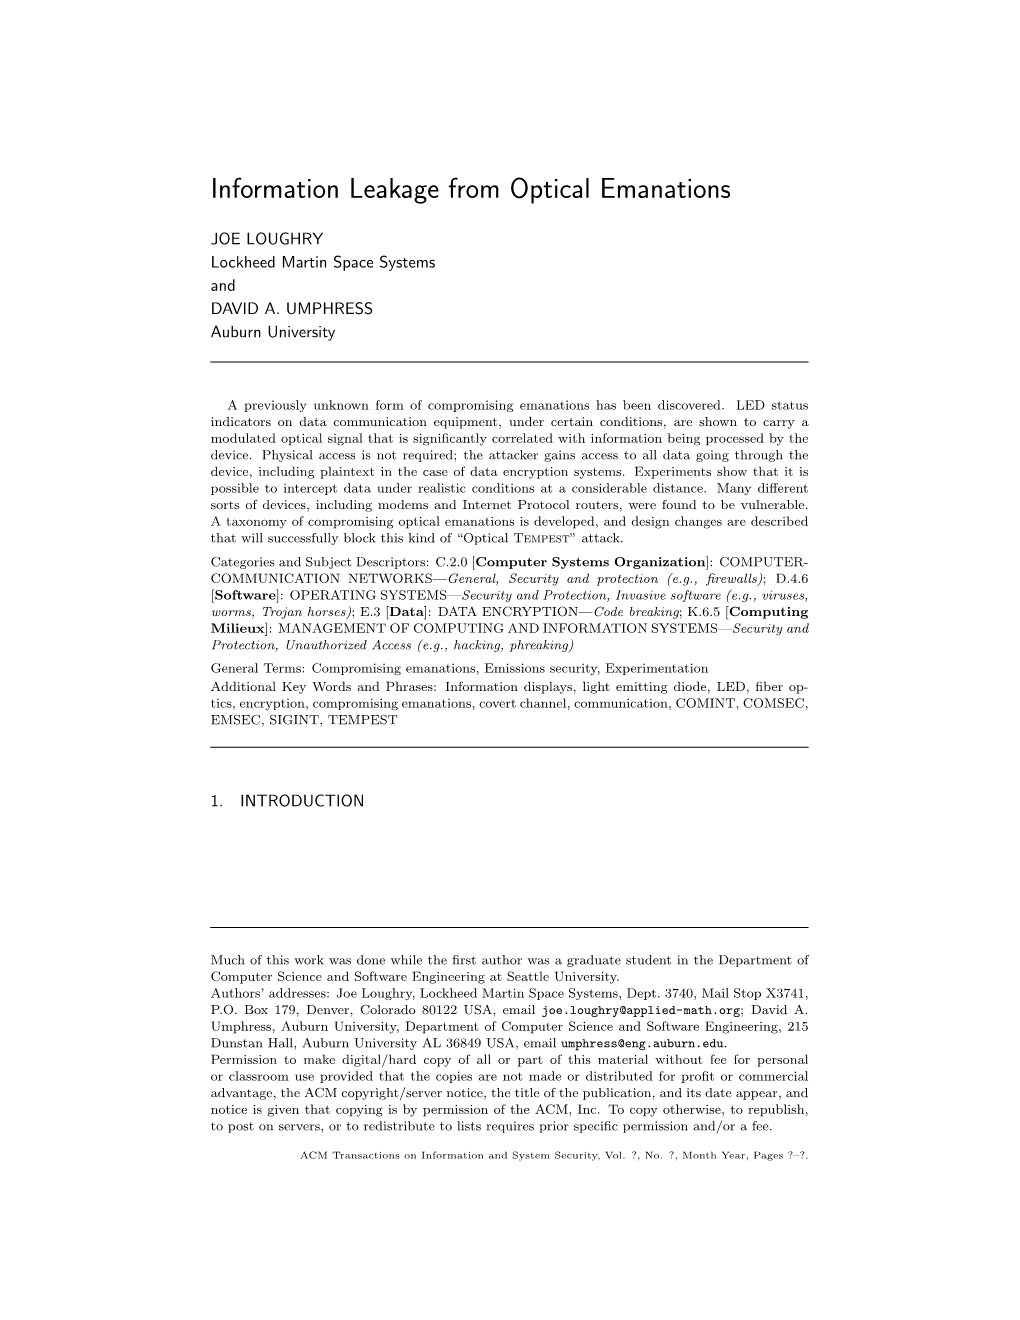 Information Leakage from Optical Emanations